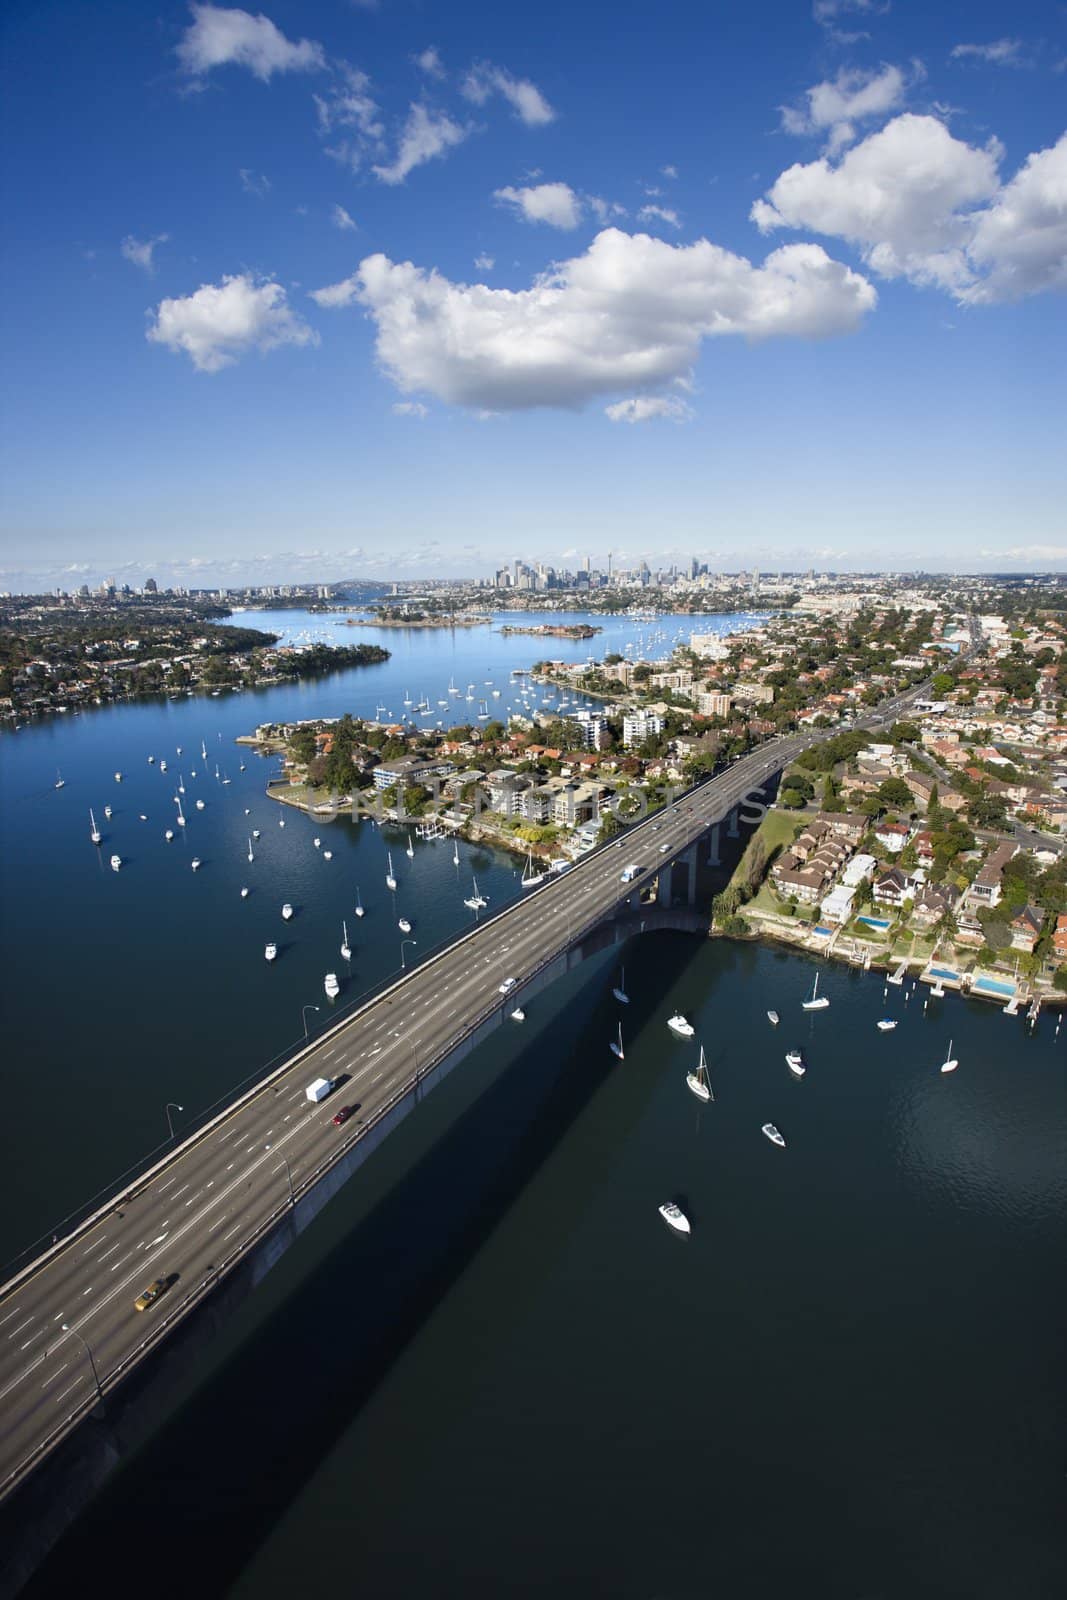 Aerial view of Victoria Road bridge and boats in Sydney, Australia.